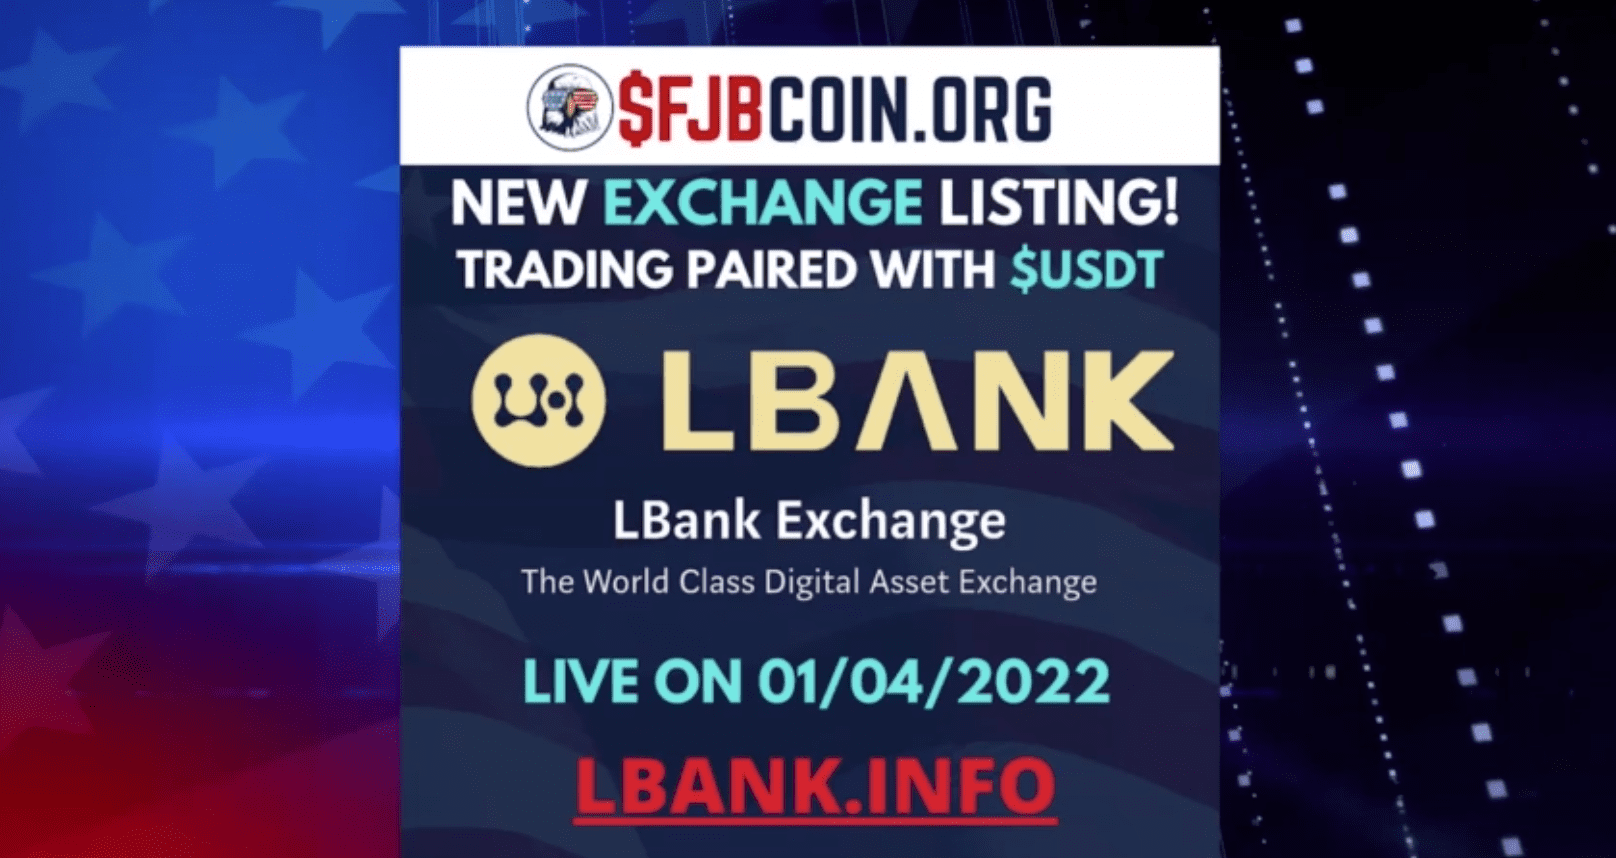 Featured image for “FJB Coin Joins Multiple Exchanges”